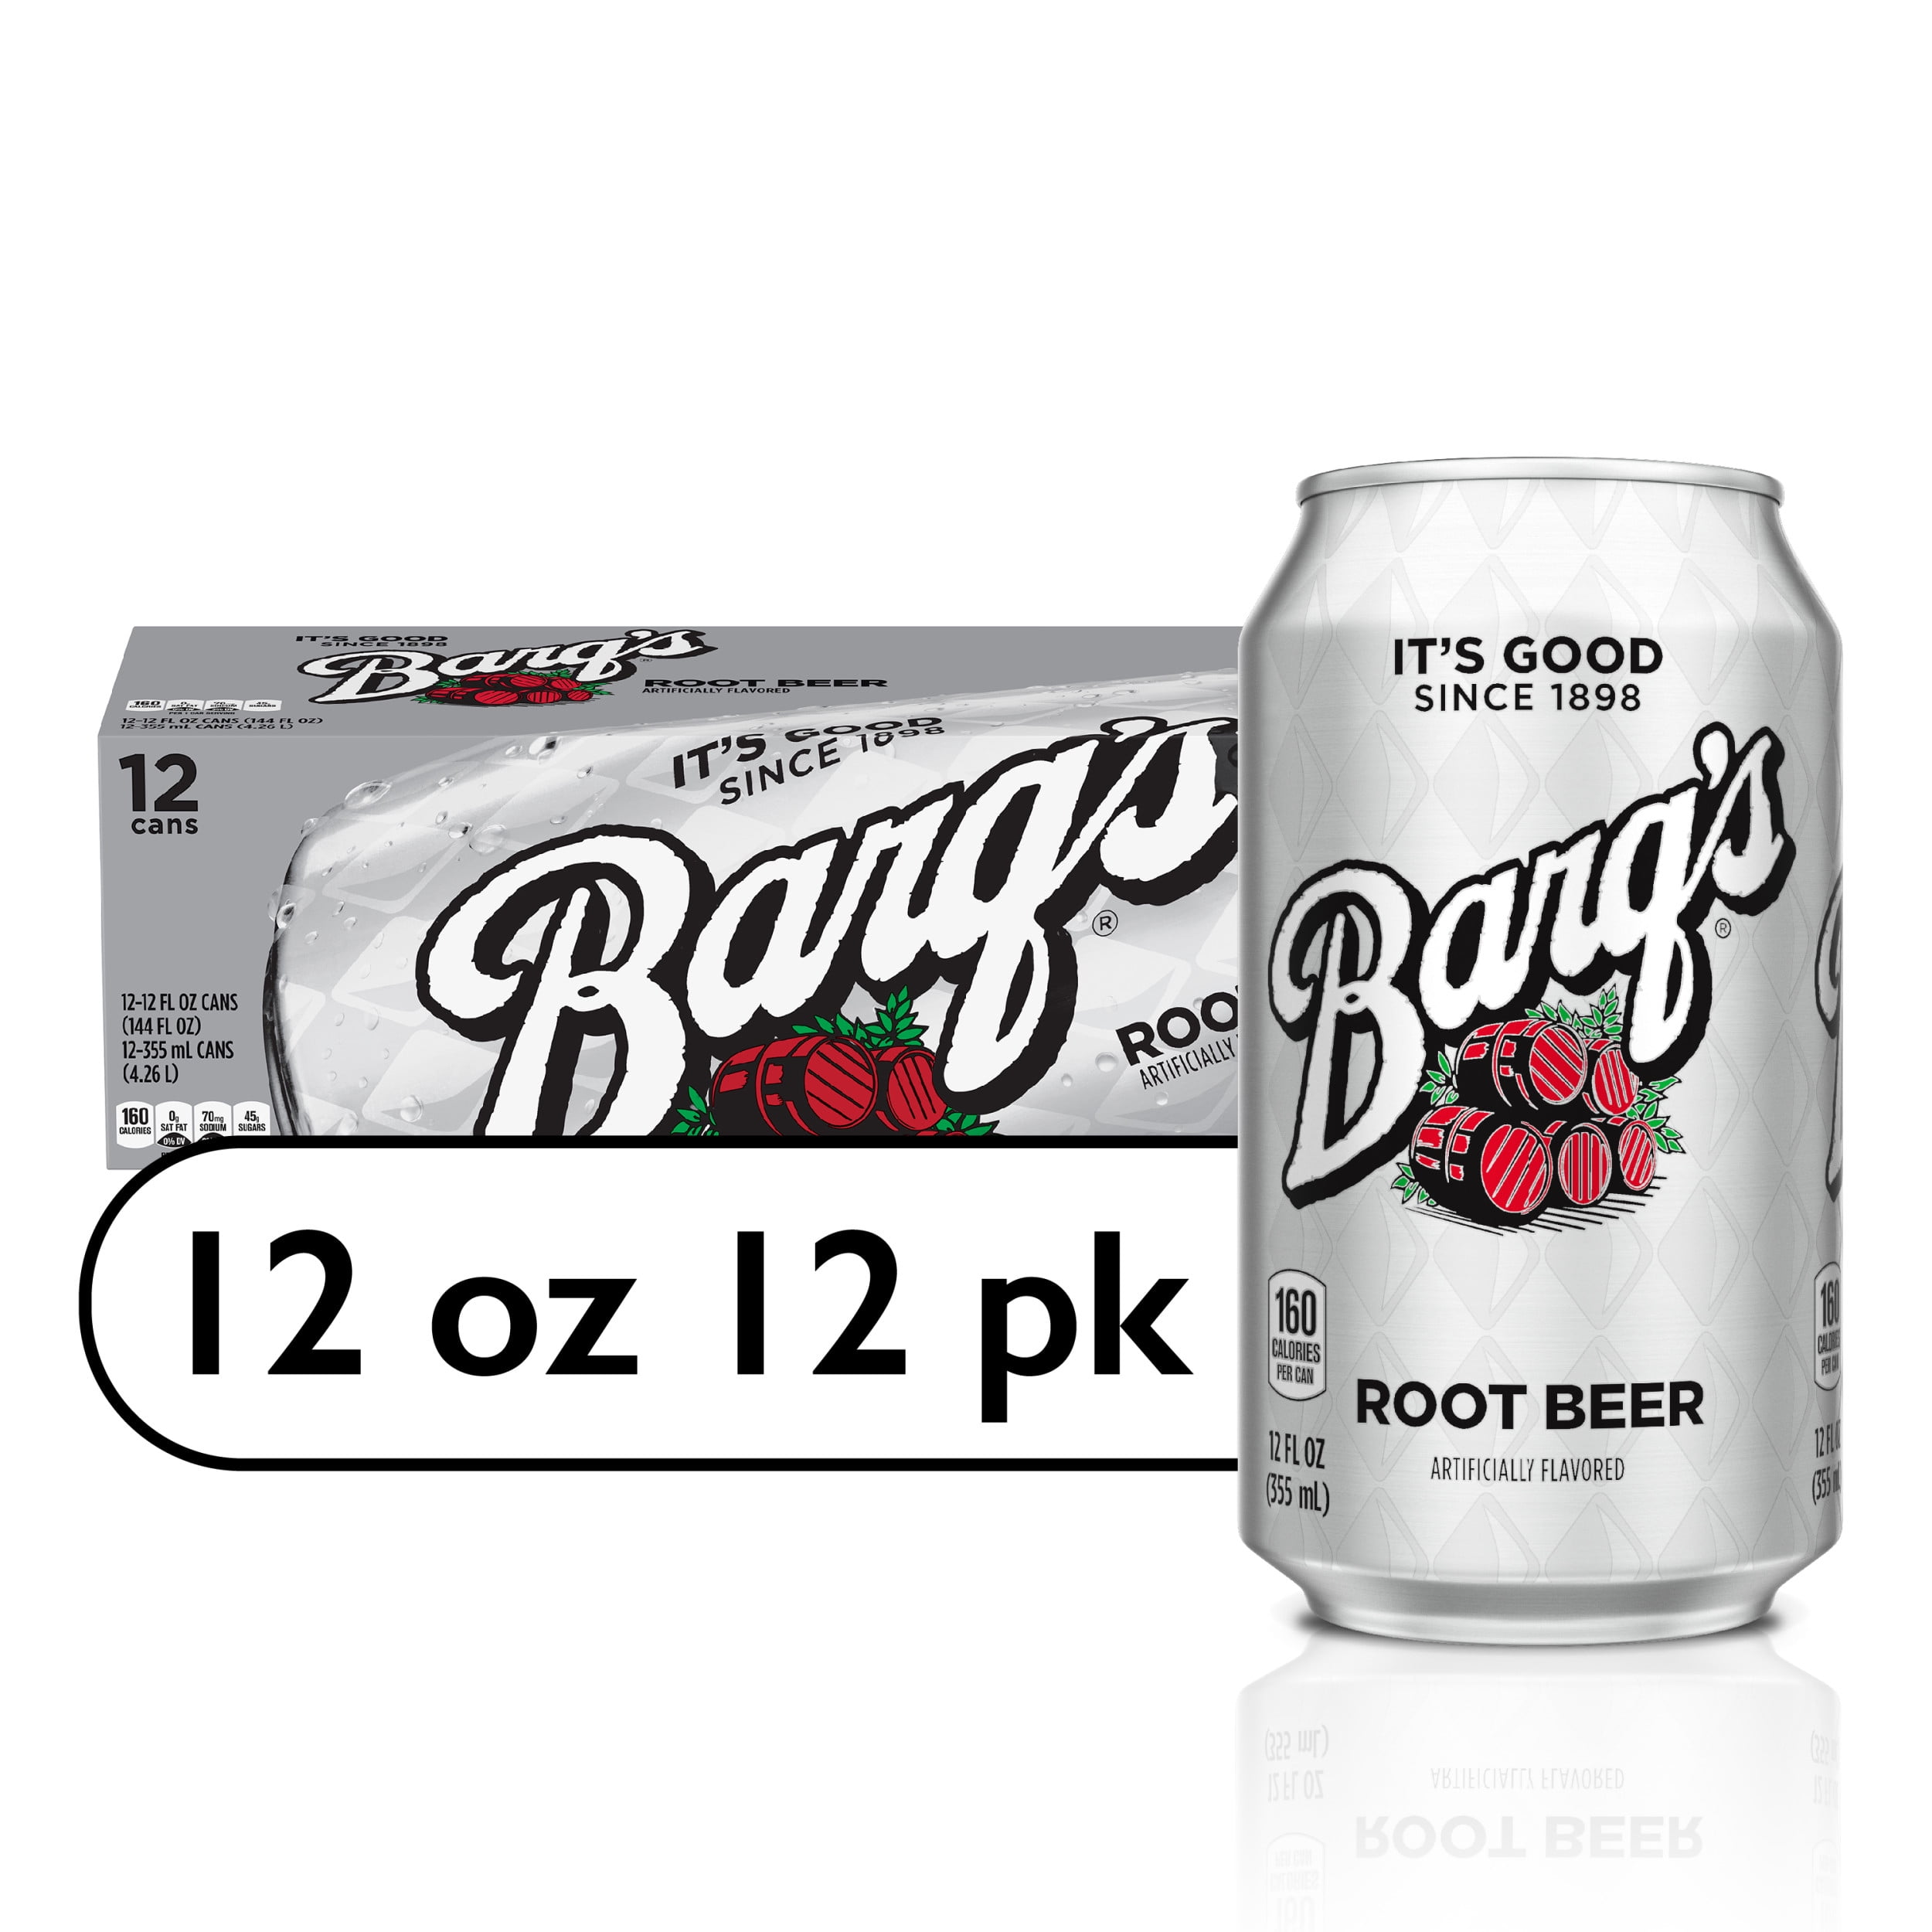 Barqs Root Beer Soda Pop, 12 fl oz, 12 Pack Cans pic